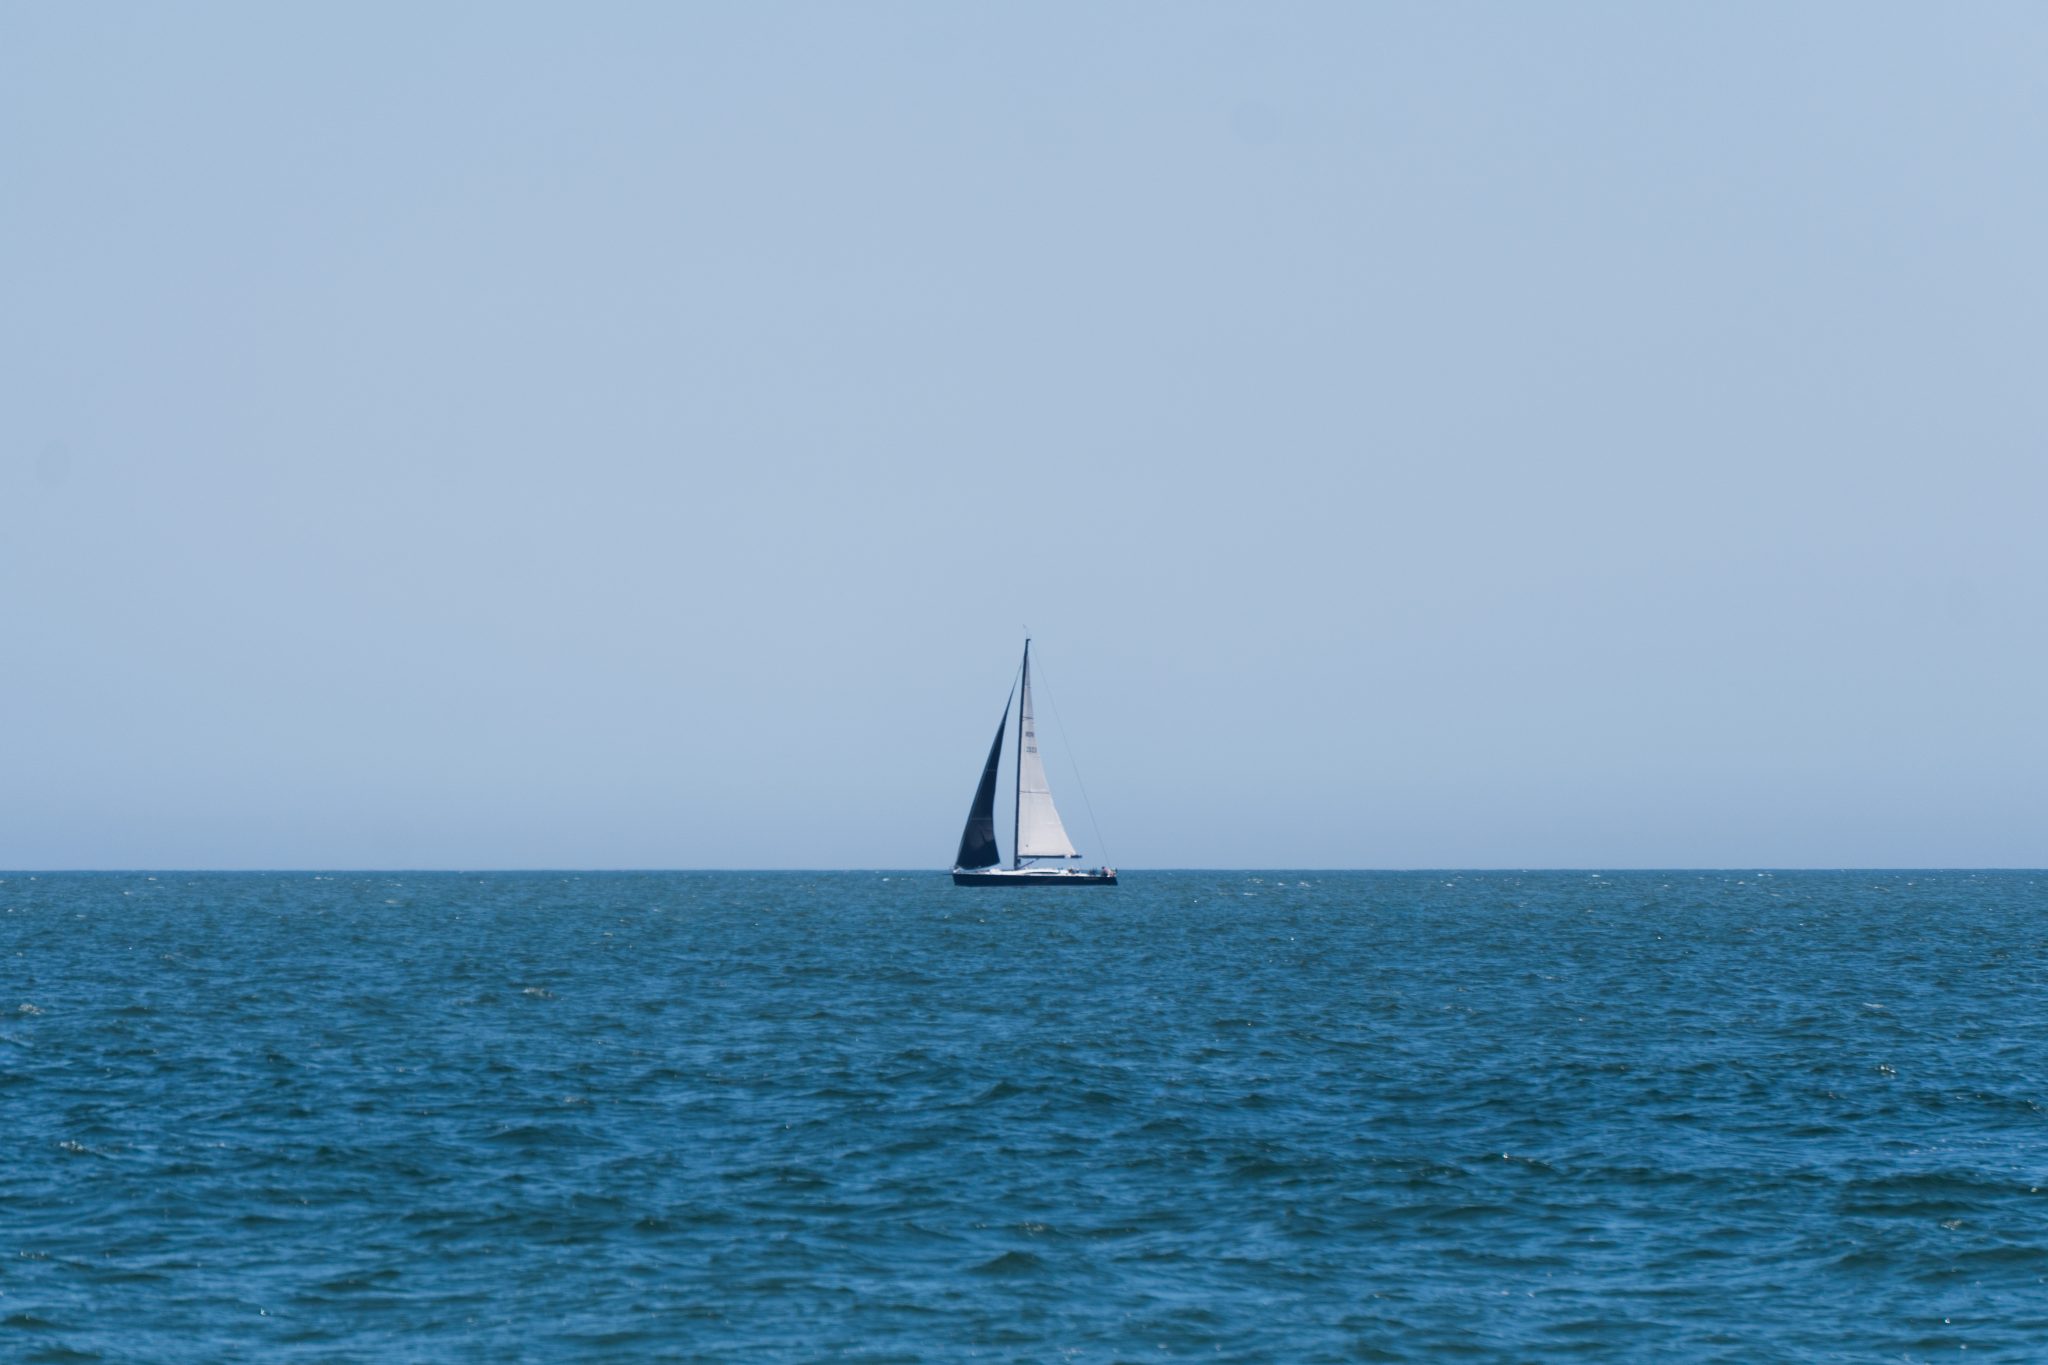 A sailboat in the distance on the horizon in the Atlantic Ocean